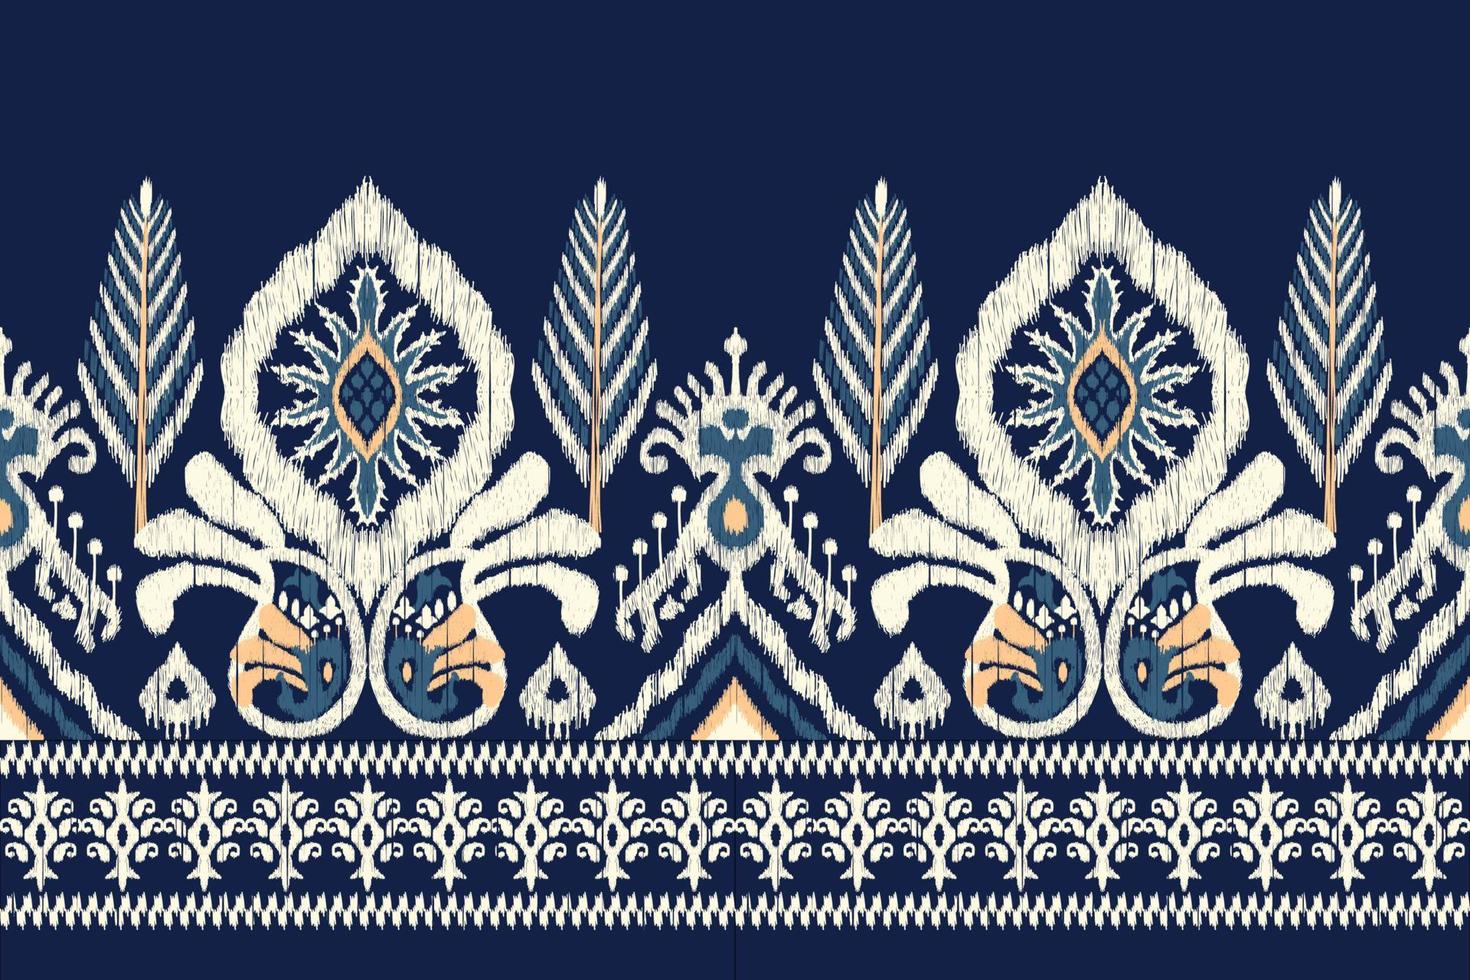 Ikat floral paisley embroidery on navy blue background.geometric ethnic oriental pattern traditional.Aztec style abstract vector illustration.design for texture,fabric,clothing,wrapping,scarf,sarong.